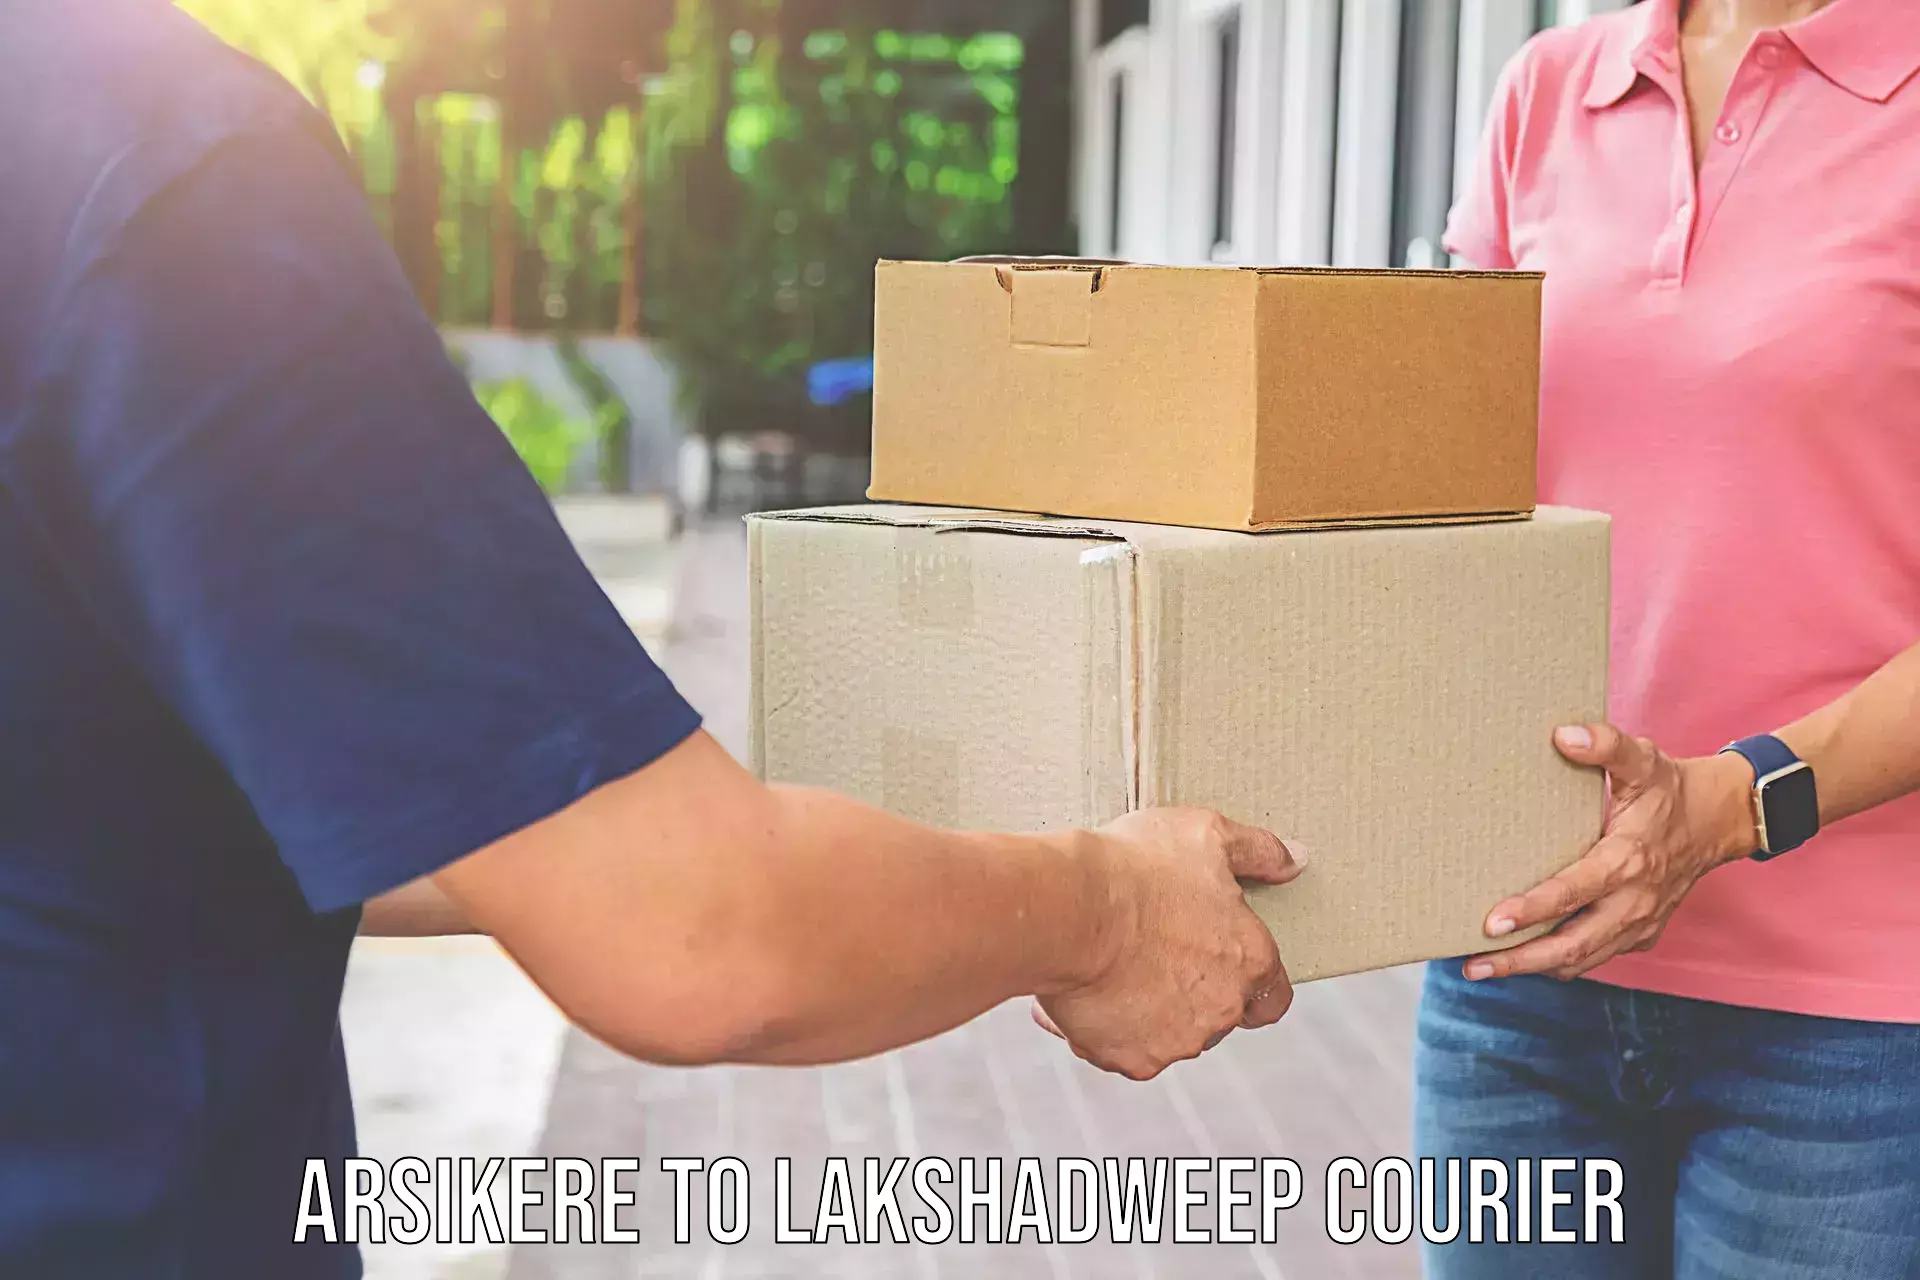 Furniture delivery service Arsikere to Lakshadweep